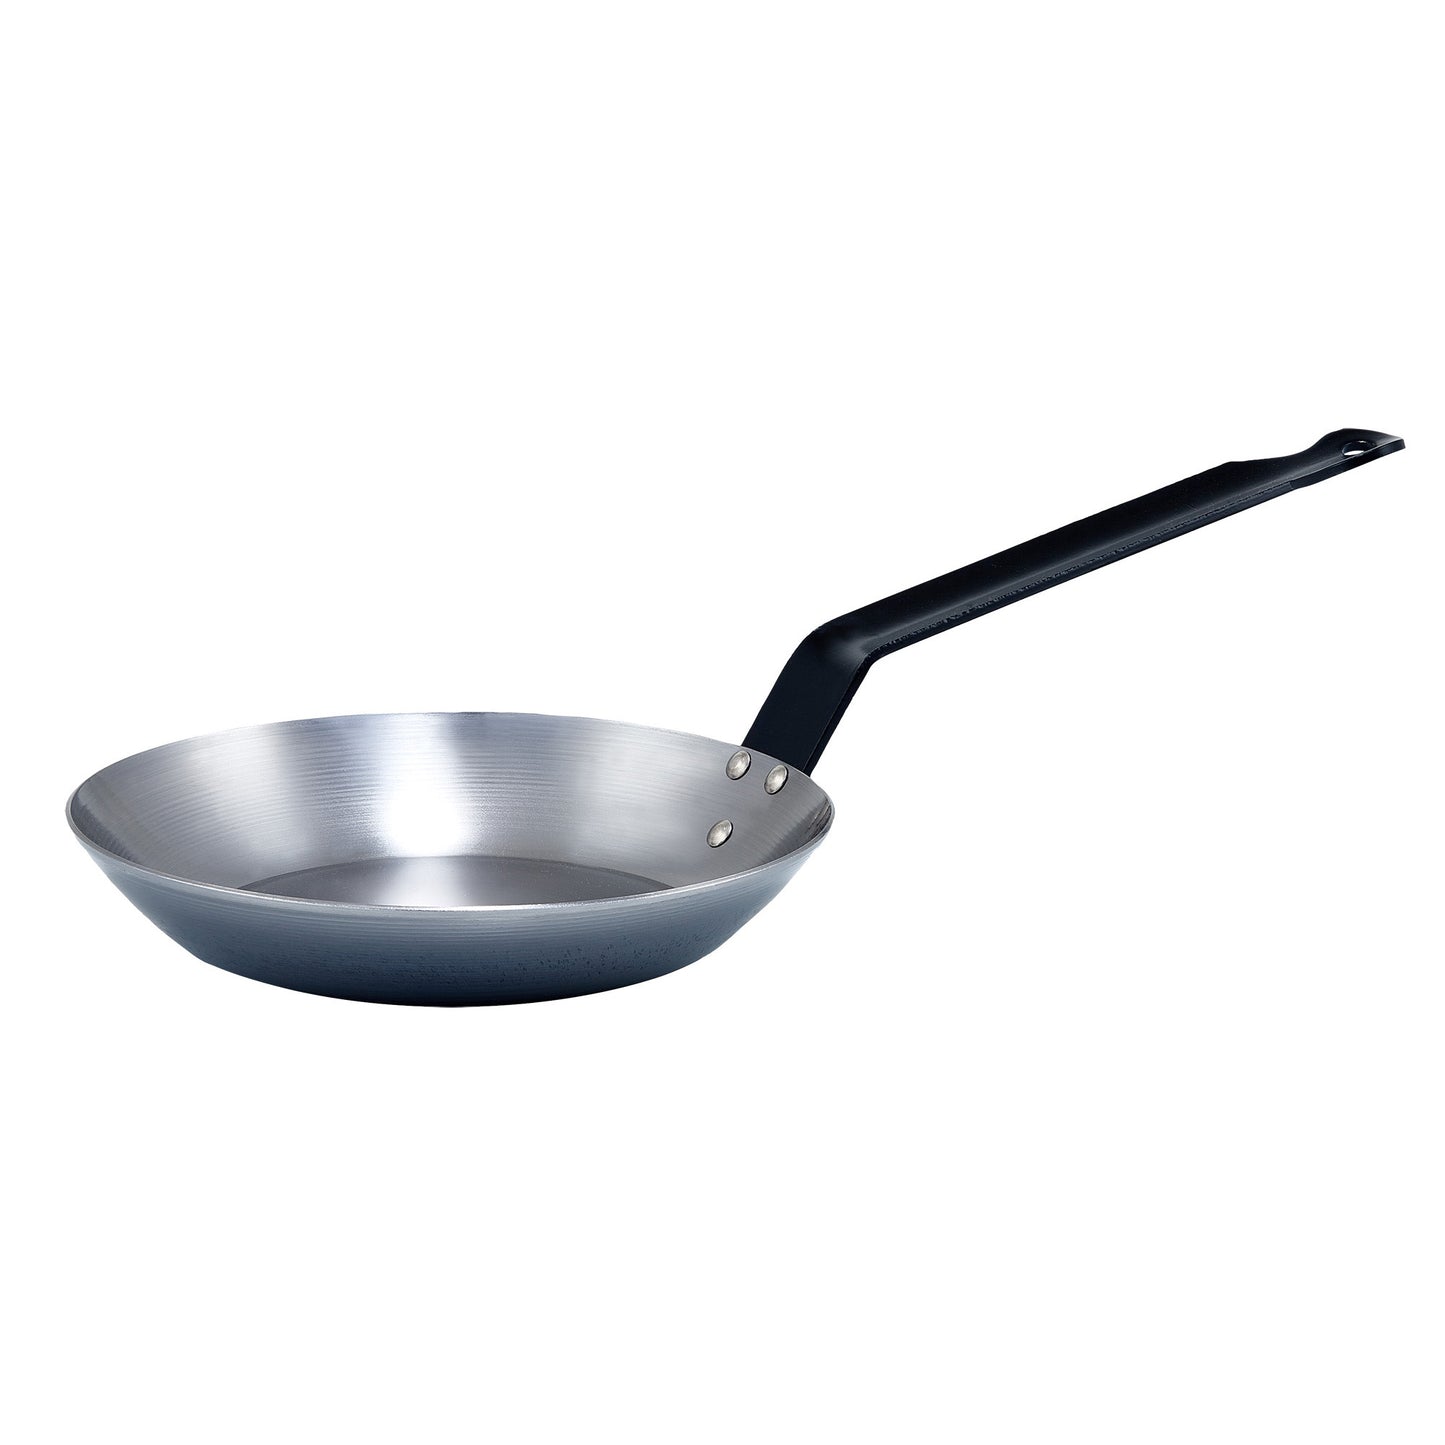 CSFP-7 - French Style Fry Pan, Polished Carbon Steel (Spain) - 7-7/8"